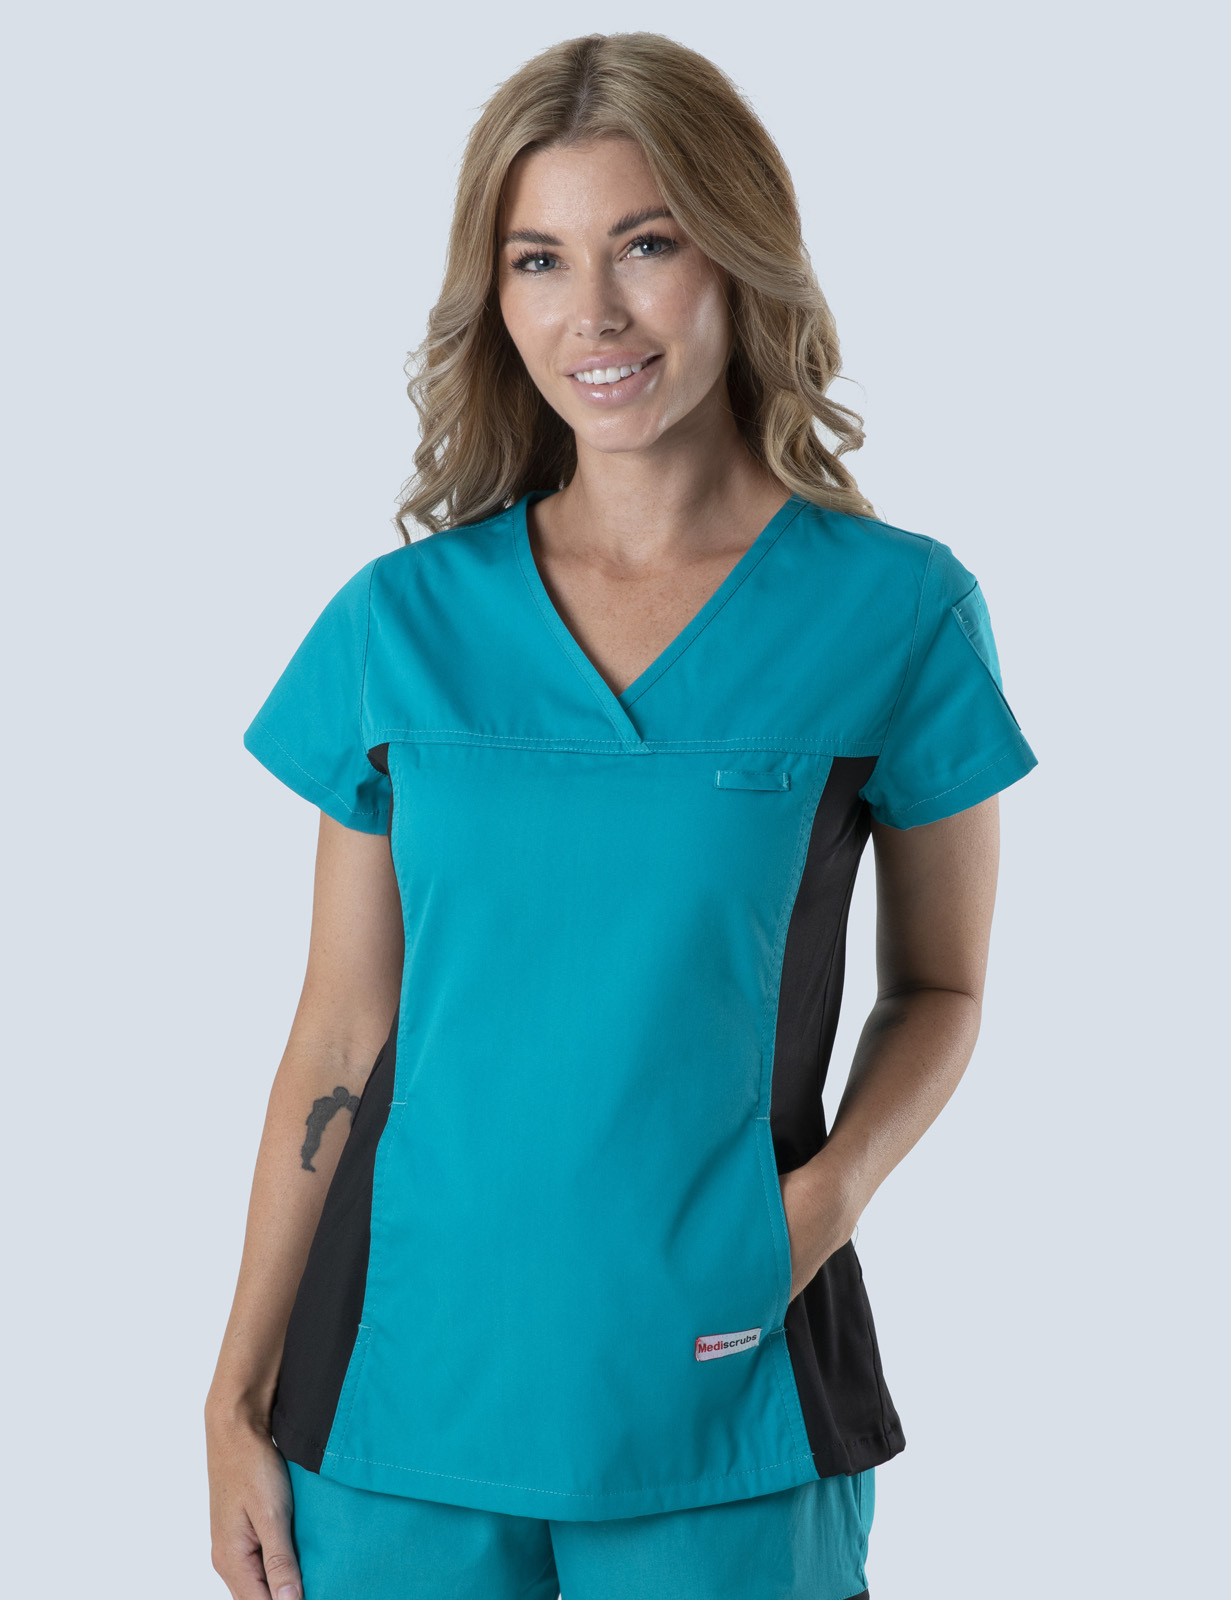 Gladstone Hospital - Paeds Unit (Women's Fit Spandex Scrub Top and Cargo Pants in Teal incl Logos)